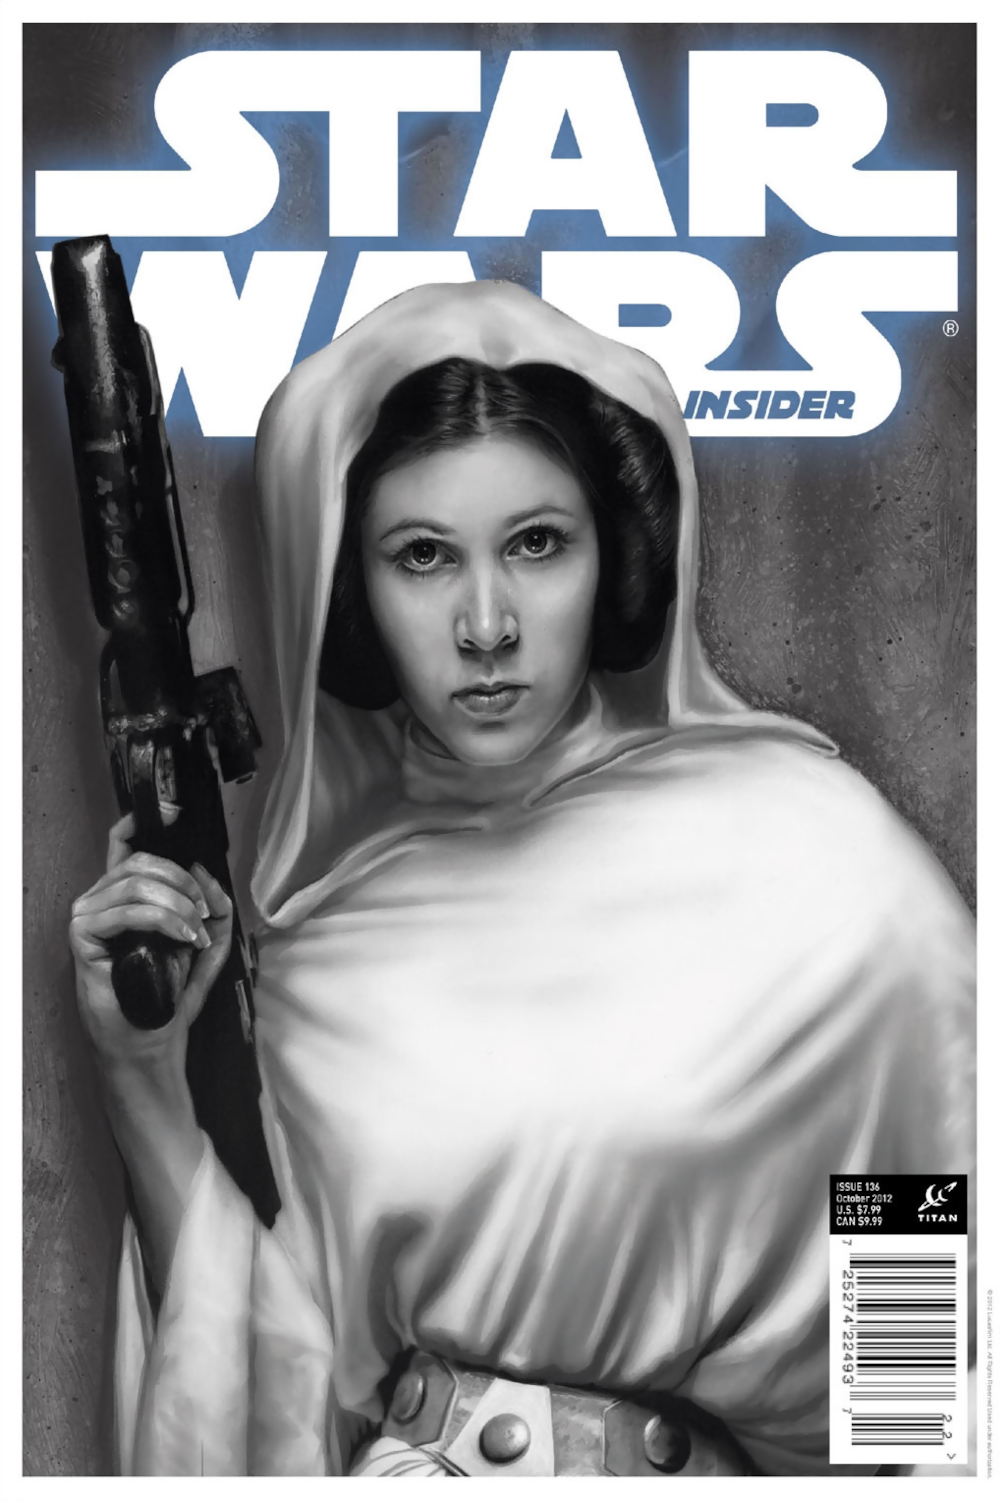 Star Wars Insider #136 (Comic Store Cover) (04.09.2012)